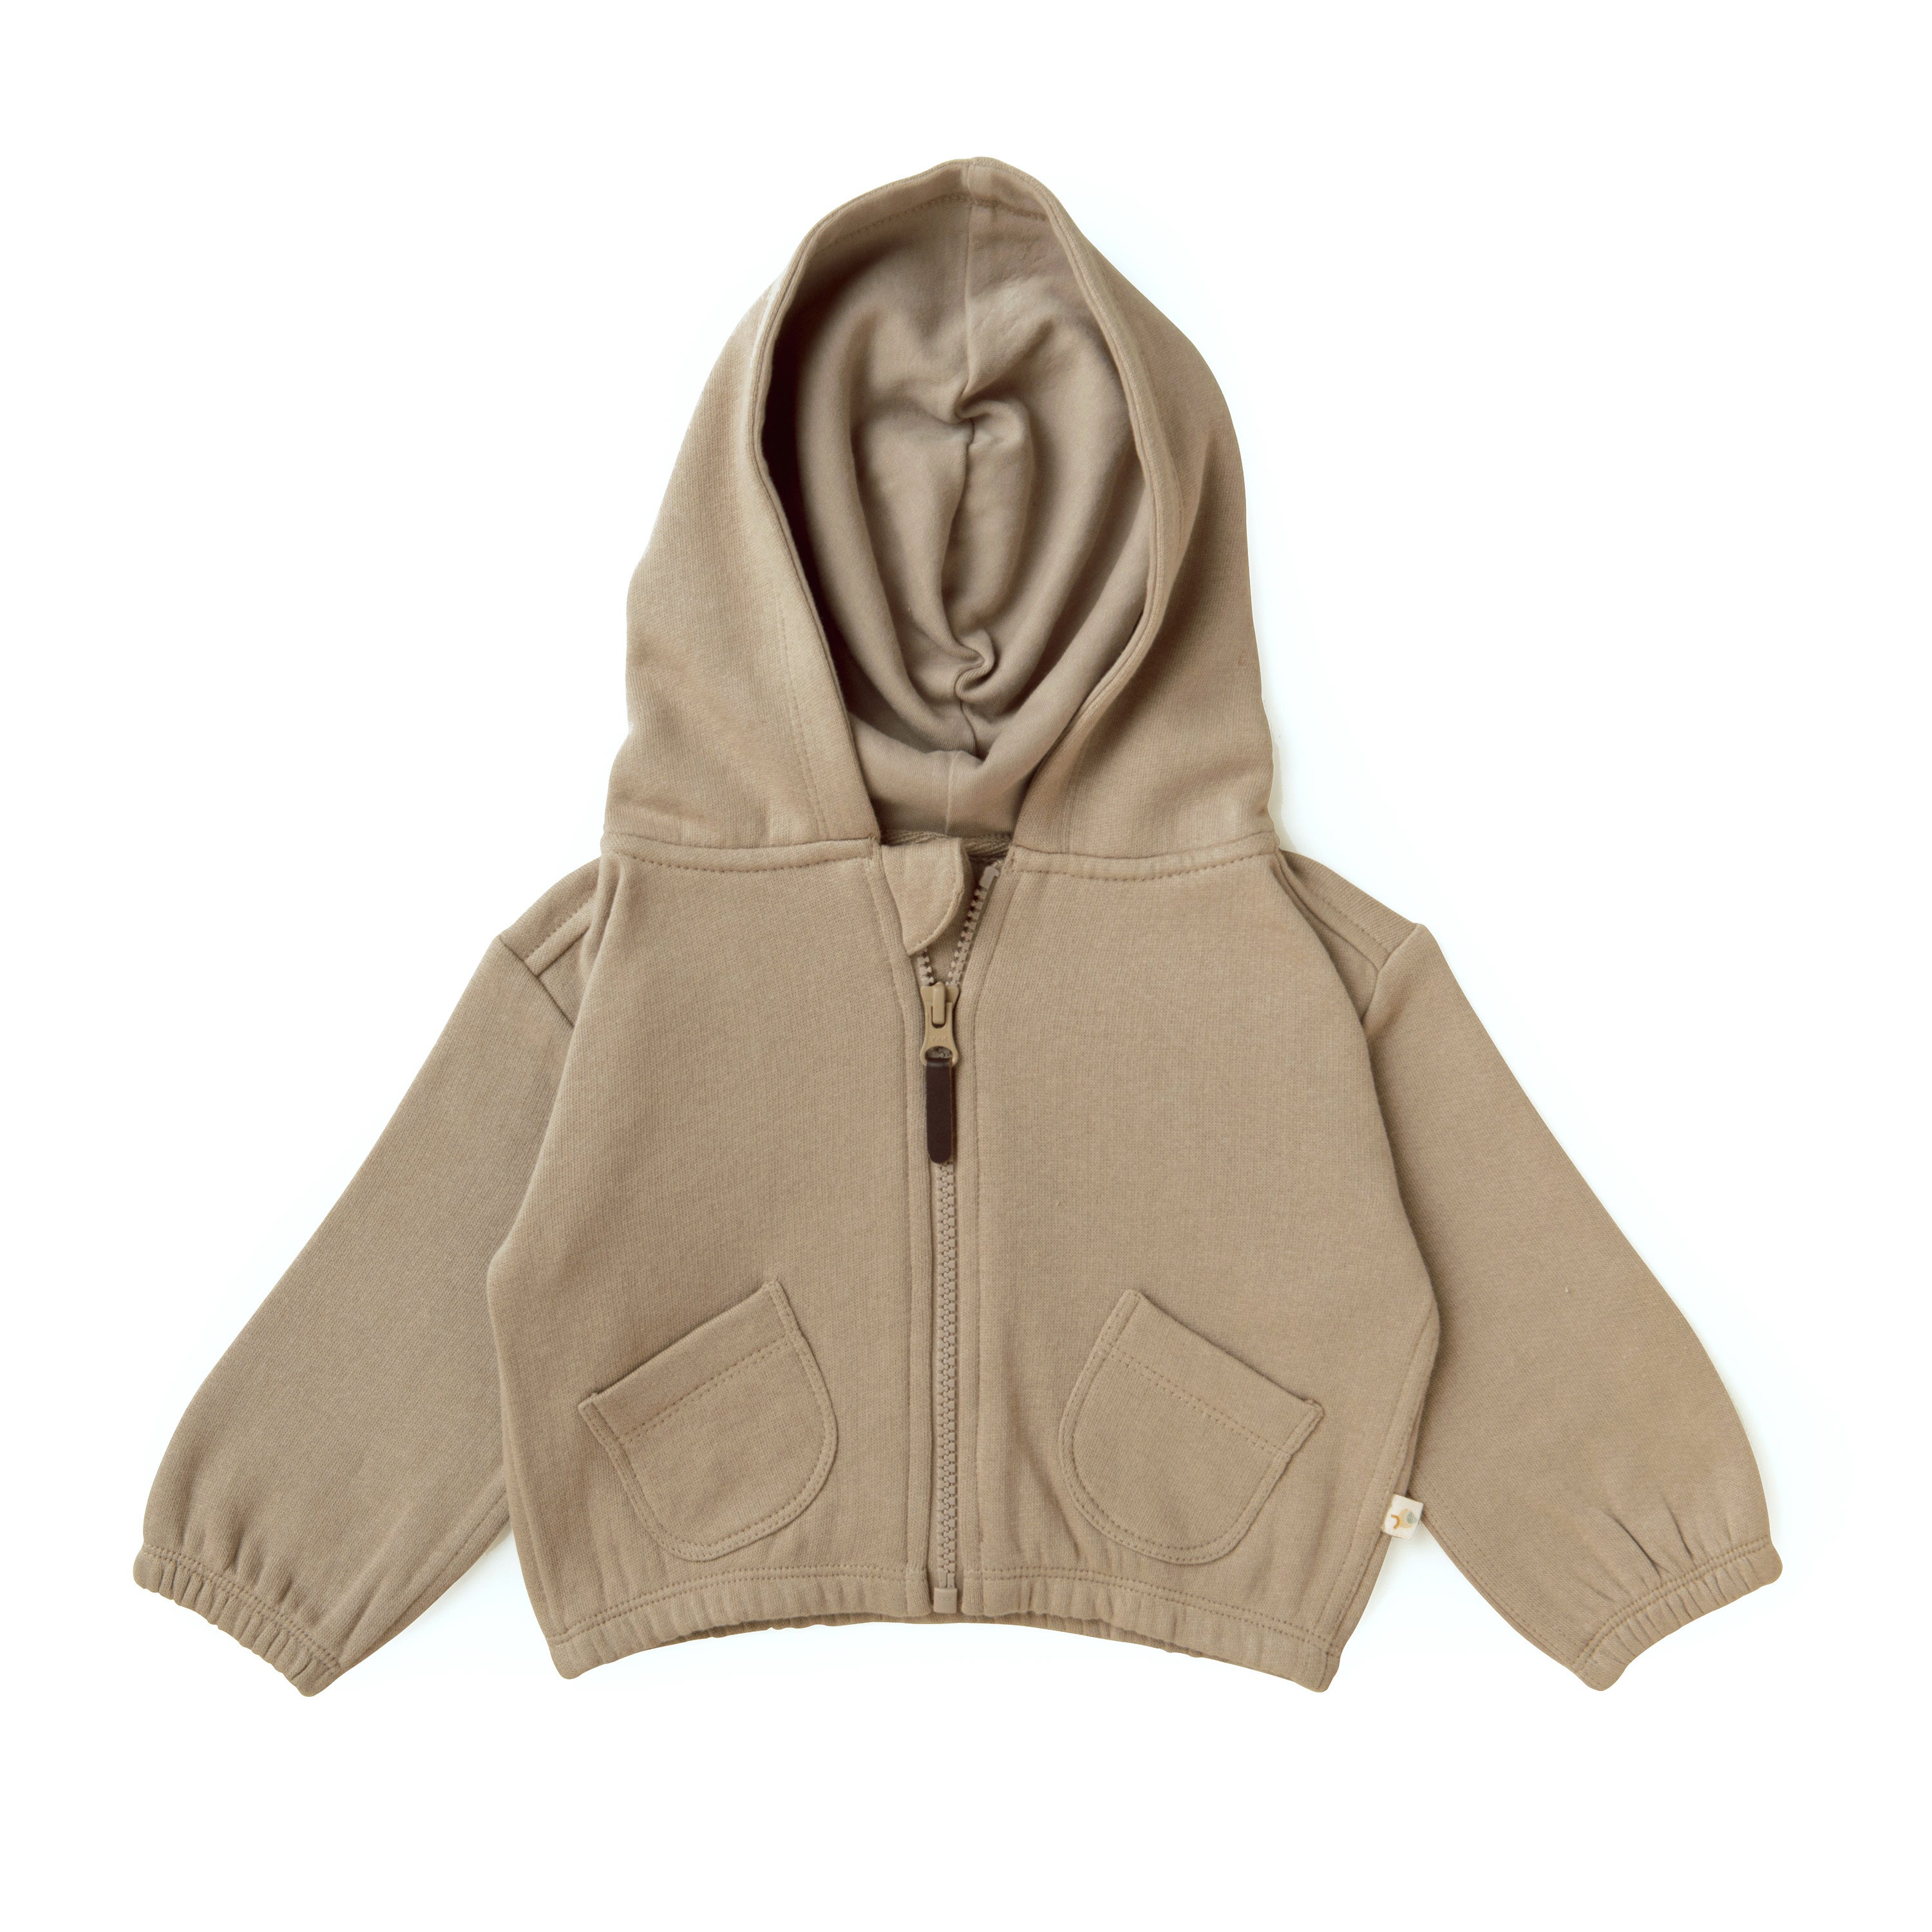 A Organic Baby organic hooded jacket in mocha with a hood, laid flat against a white background, displaying ribbed cuffs and two front pockets.